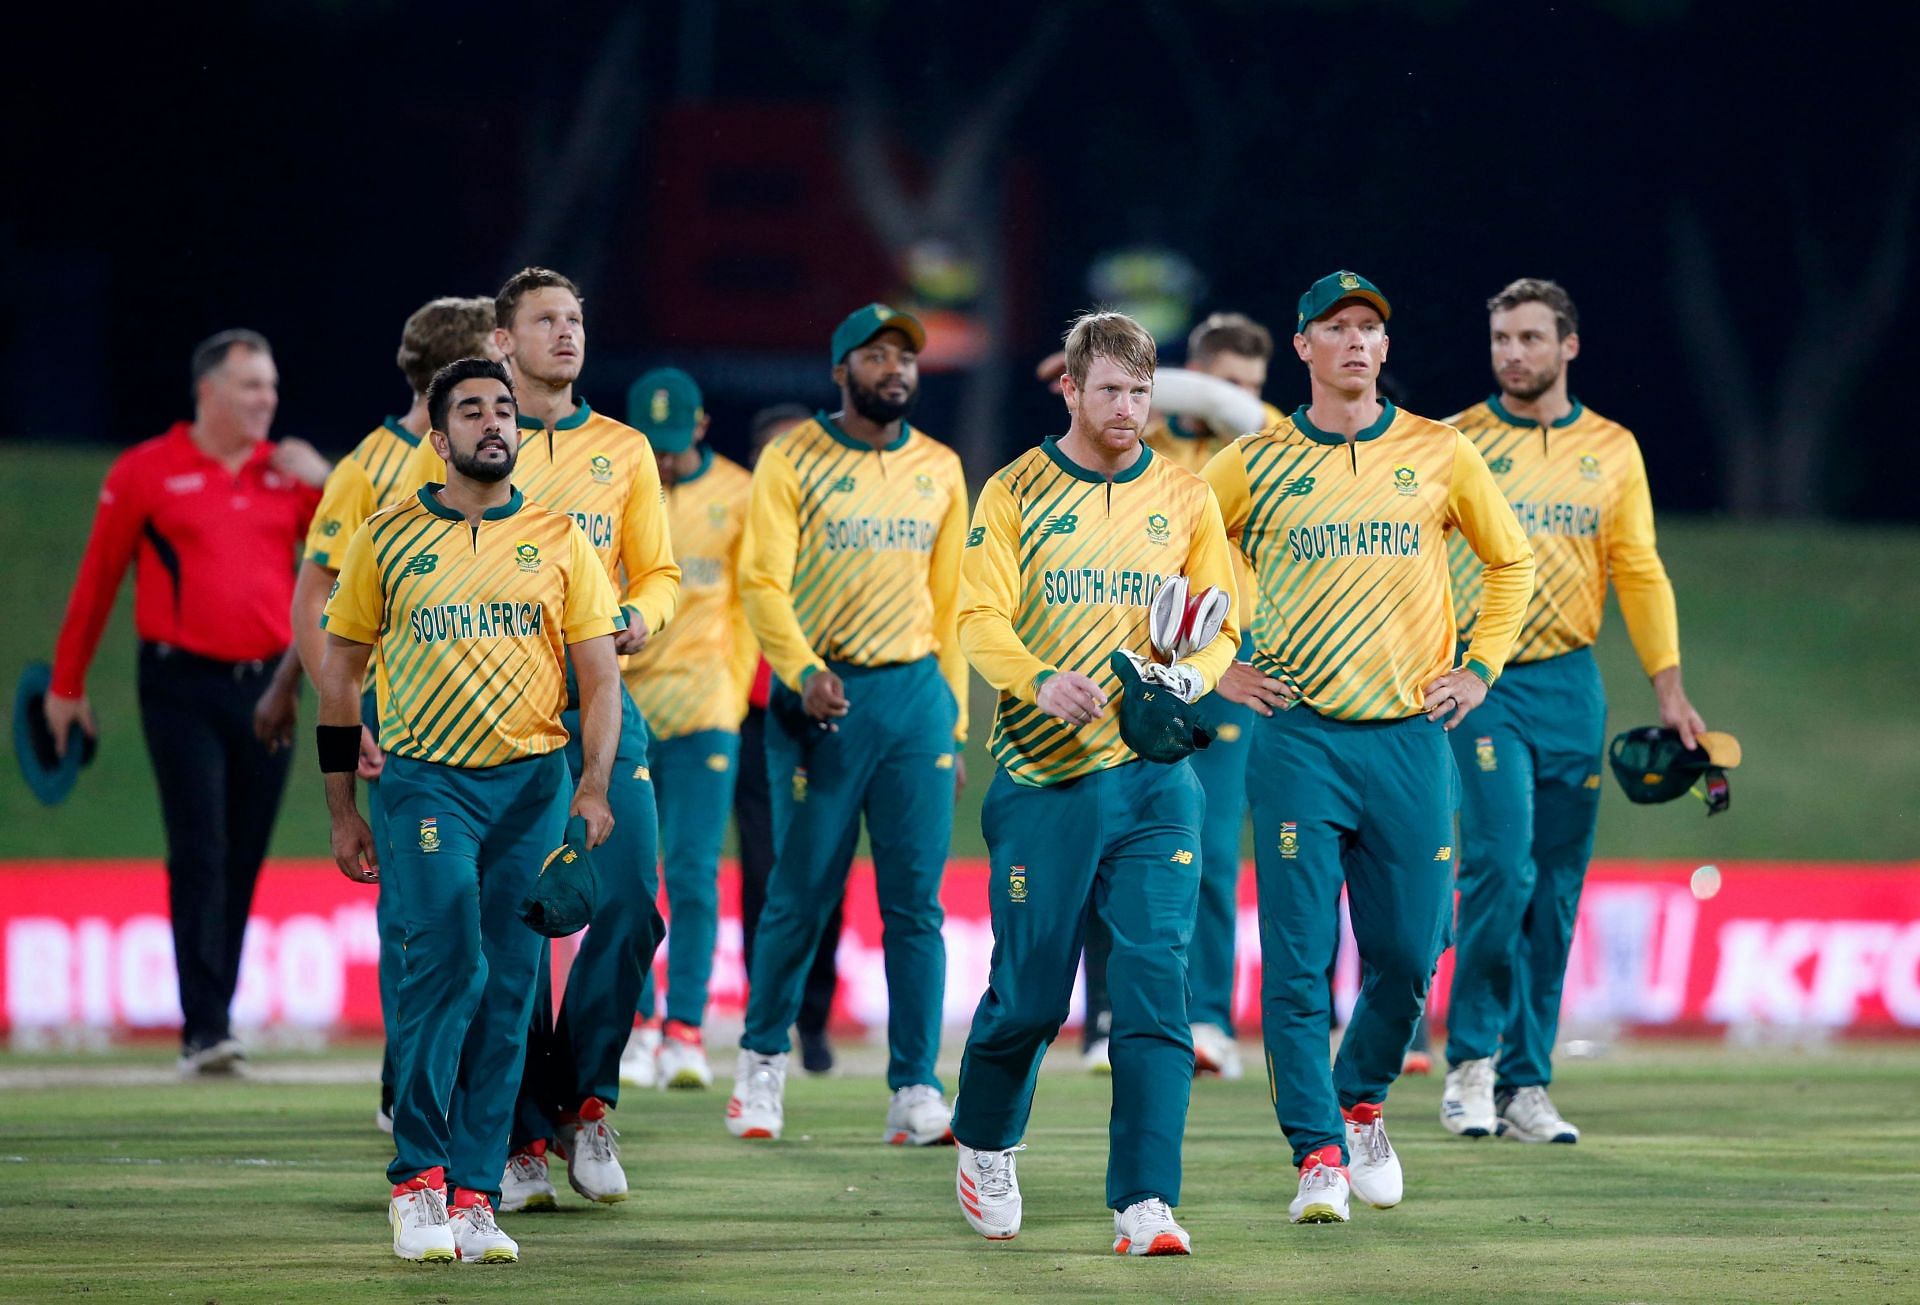 South Africa have had an incredible run in T20Is in 2021.